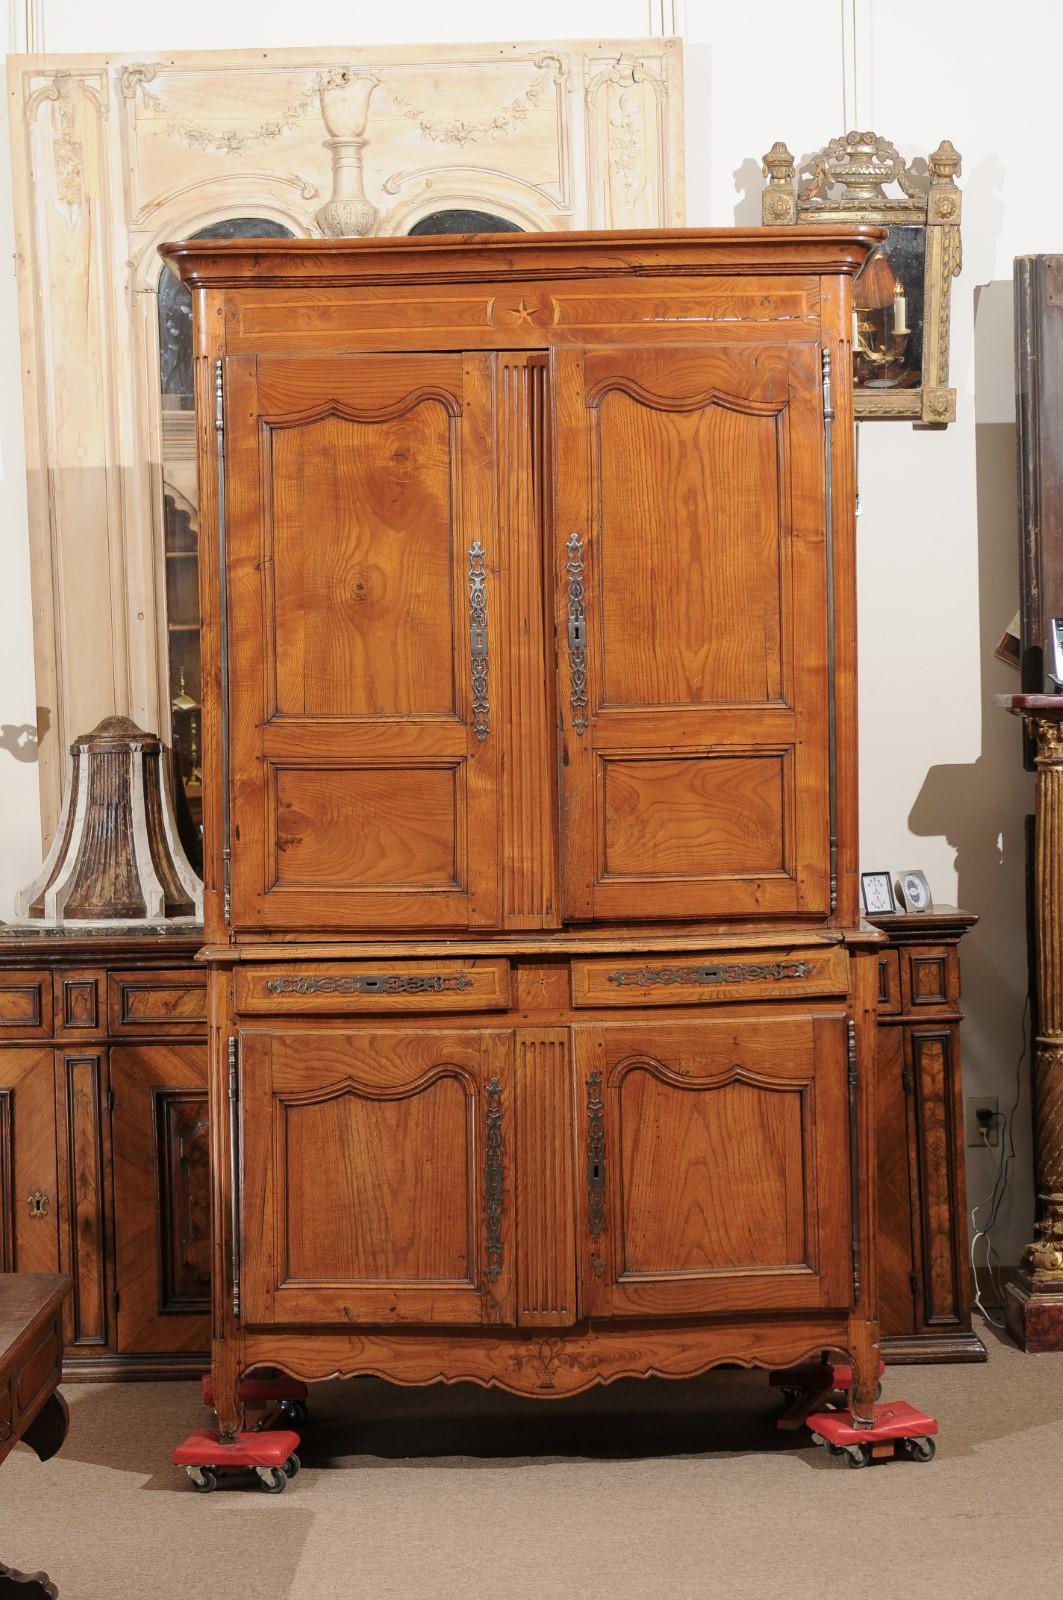 A 19th century French Transitional Louis XV and Louis XVI buffet deux corps in elm with carved fluting, inlay detail, 4 paneled doors with interior shelving and carved shaped apron ending on cabriole legs.